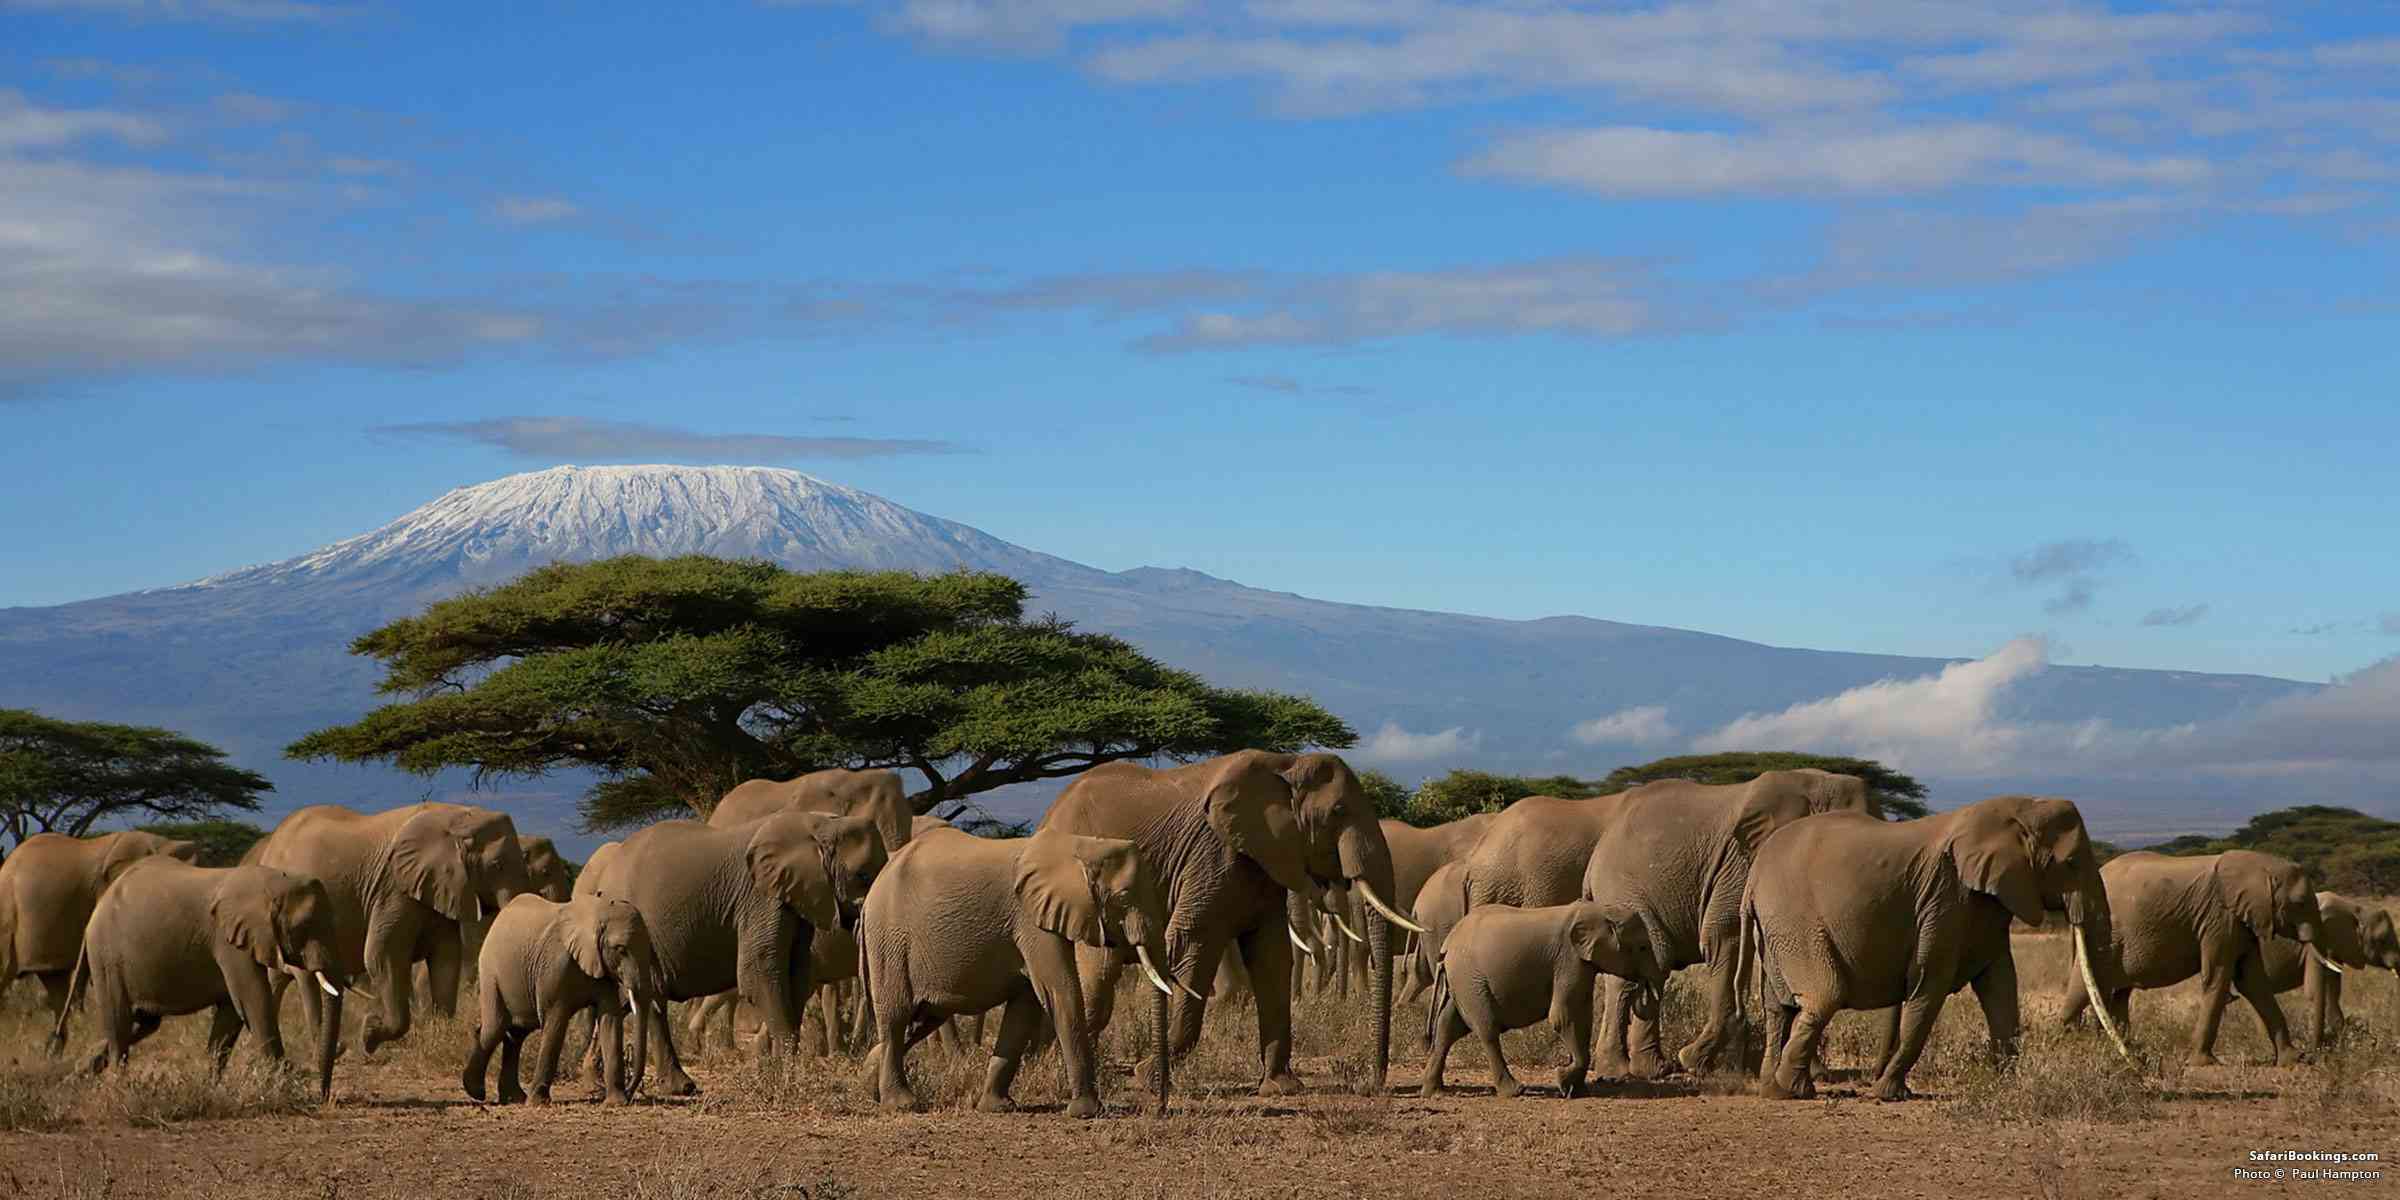 east african adventures tours and safaris